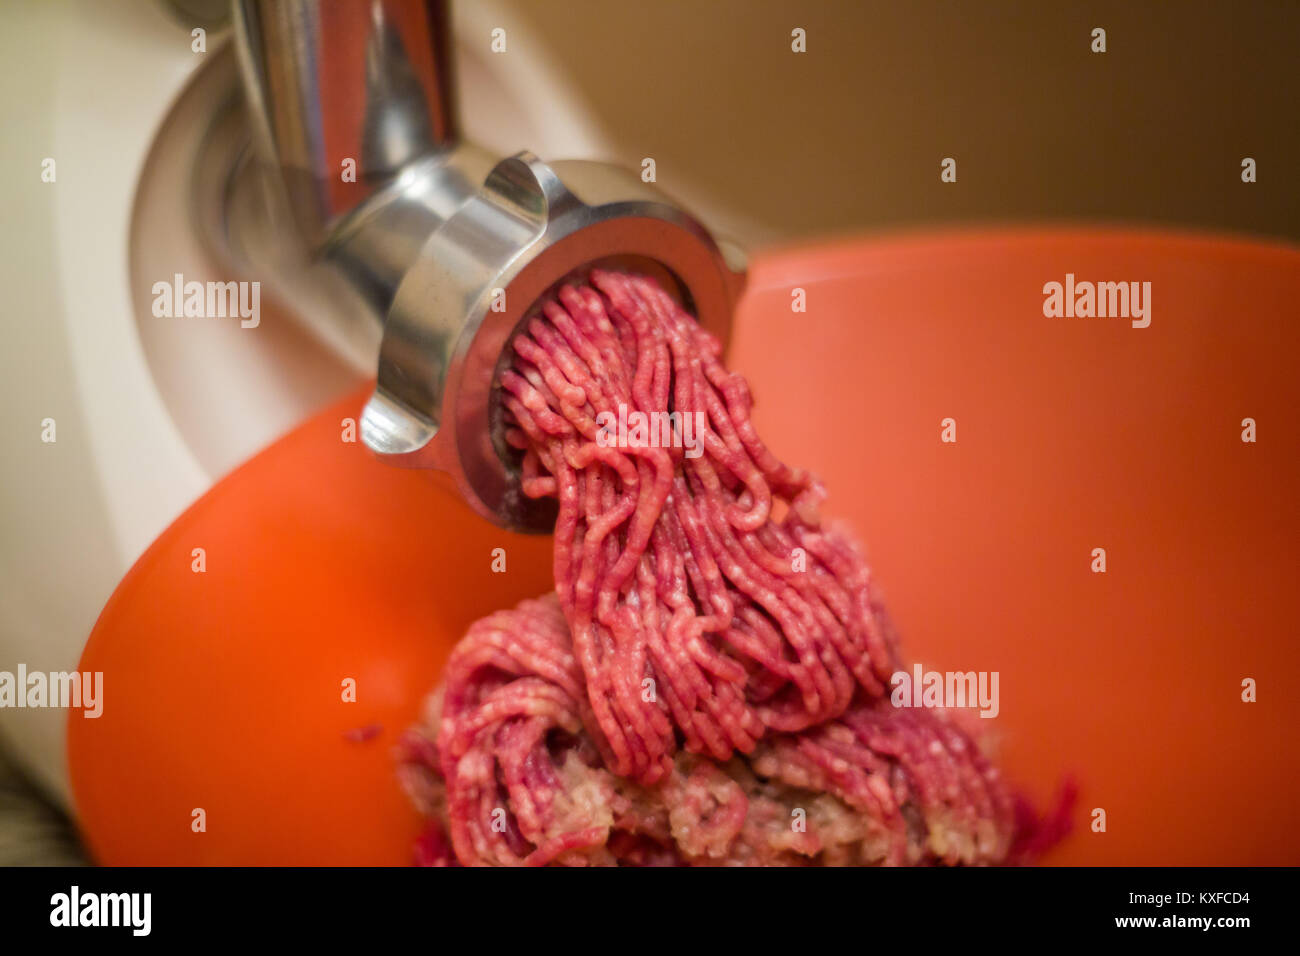 meat and grinder. Minced meat and meat grinder. Meat grinder machine  chopping uncooked ground meat Stock Photo - Alamy